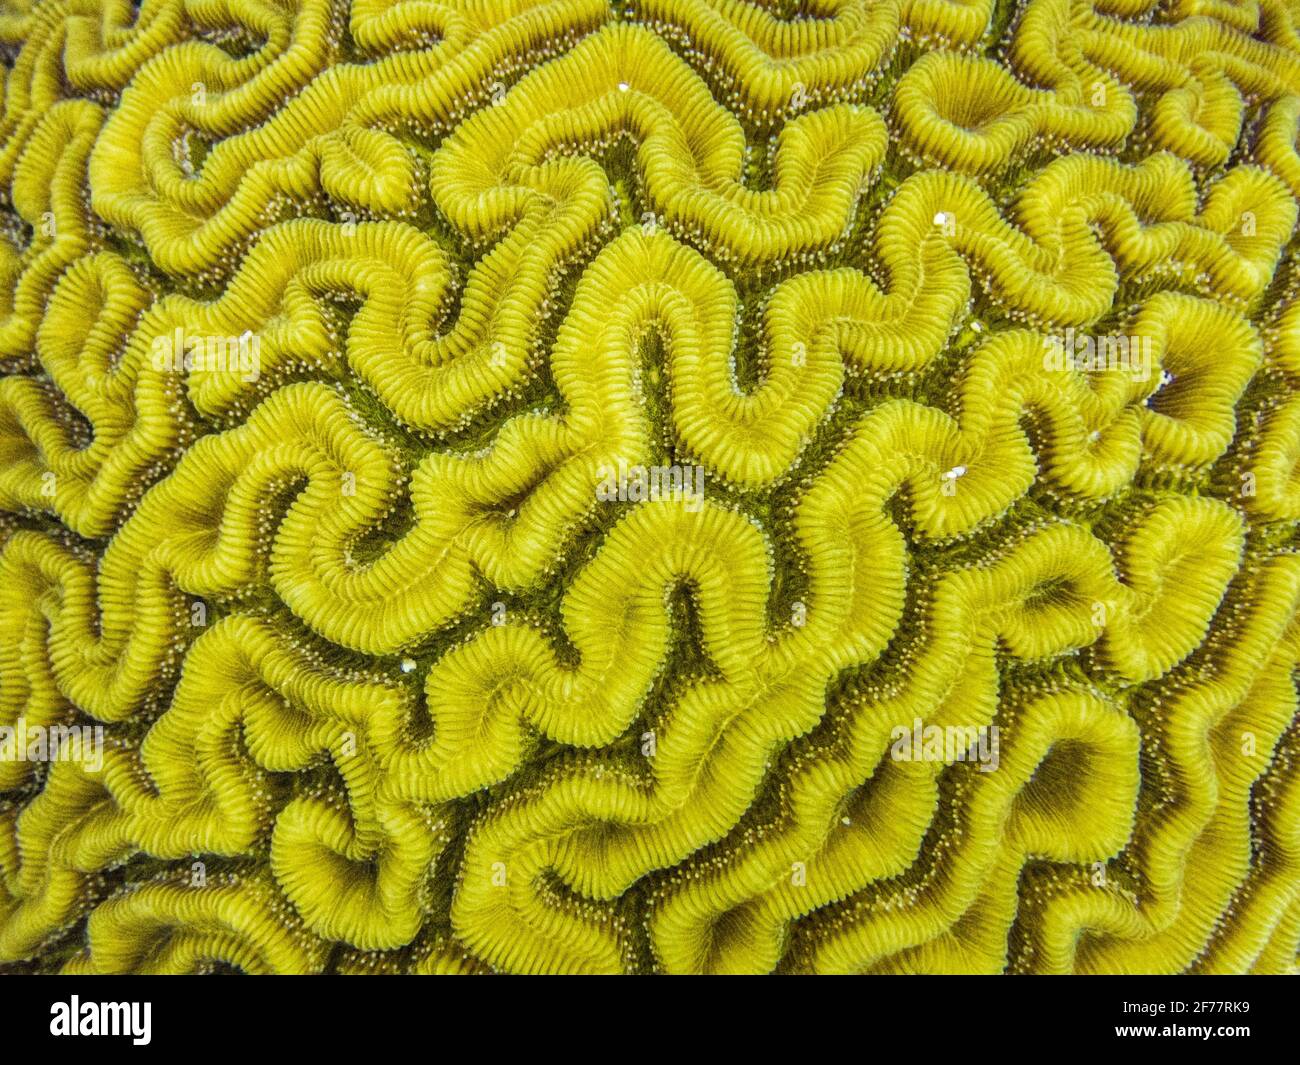 France, Caribbean, French West Indies, Guadeloupe, Grand Cul-de-Sac marin, heart of the national park of Guadeloupe, scuba diving on the site of Pierre aux Anges, in the lagoon around the islet Fajou, detail of a brain coral, underwater view Stock Photo